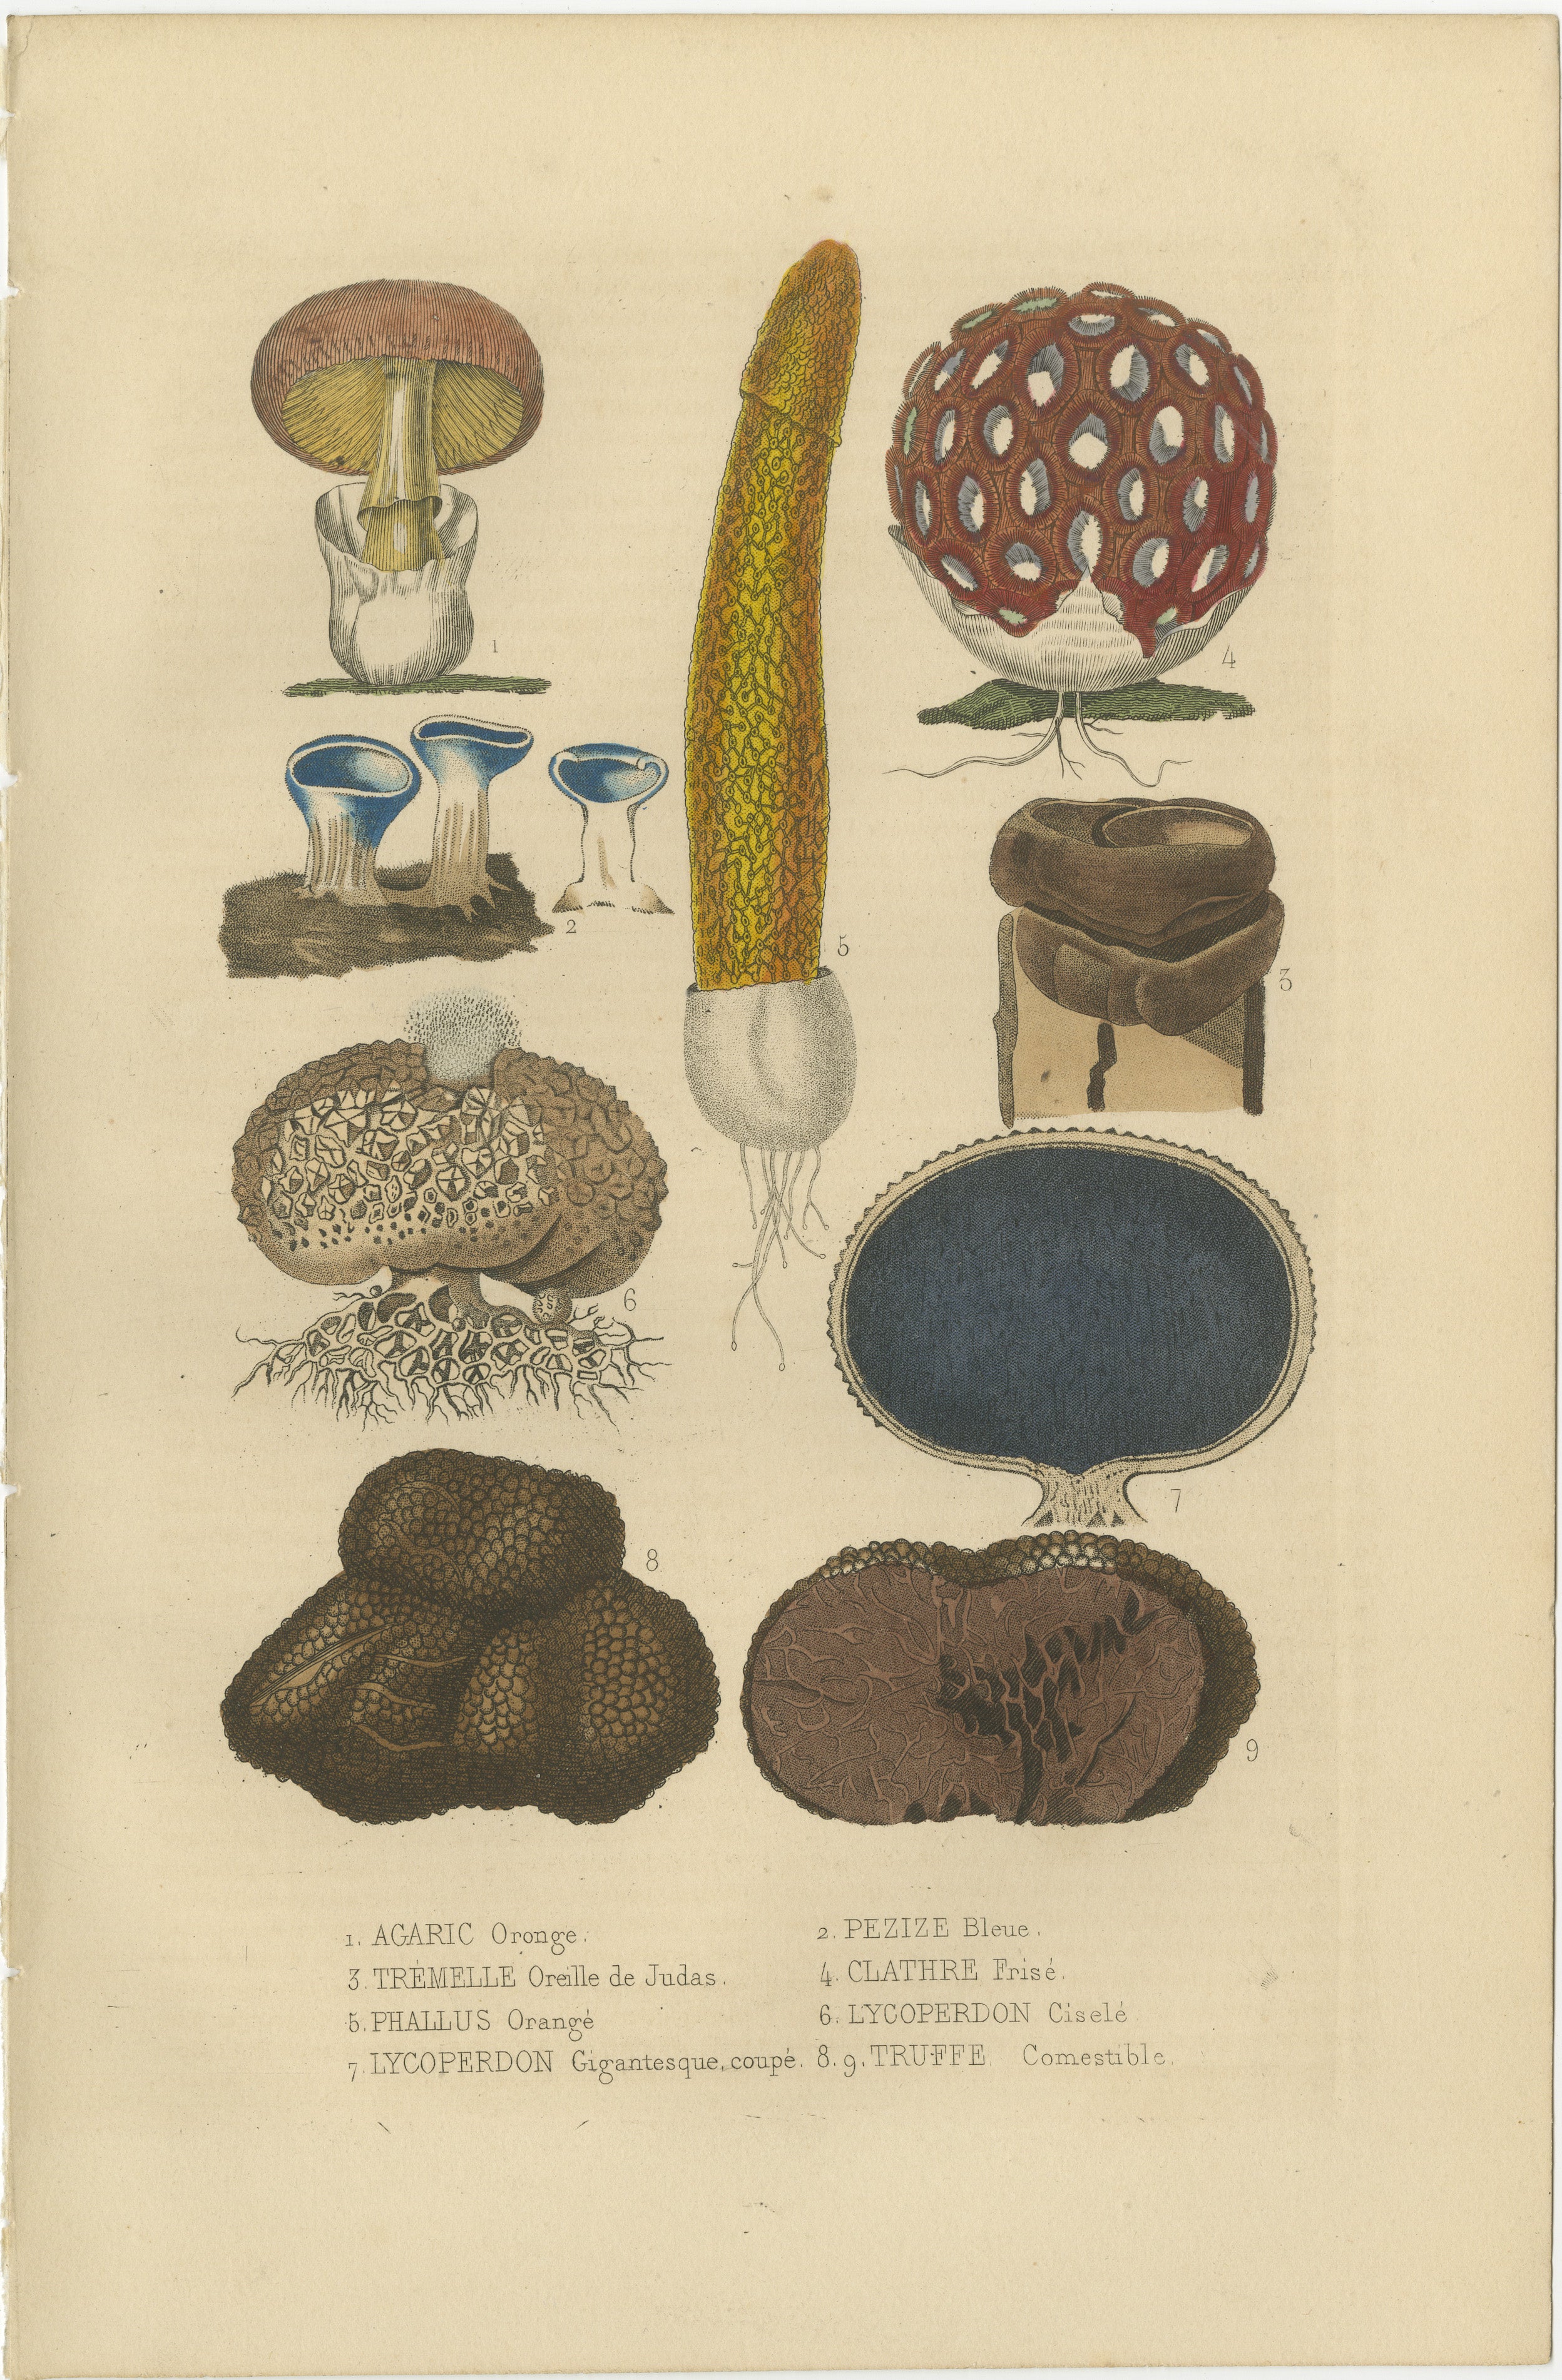 The image uploaded is a hand-colored engraving depicting various fungi, likely from the 'Dictionnaire Classique des Sciences Naturelles' by Pierre Auguste Joseph Drapiez, published in 1845. Here's a description of each depicted fungus and a proposed